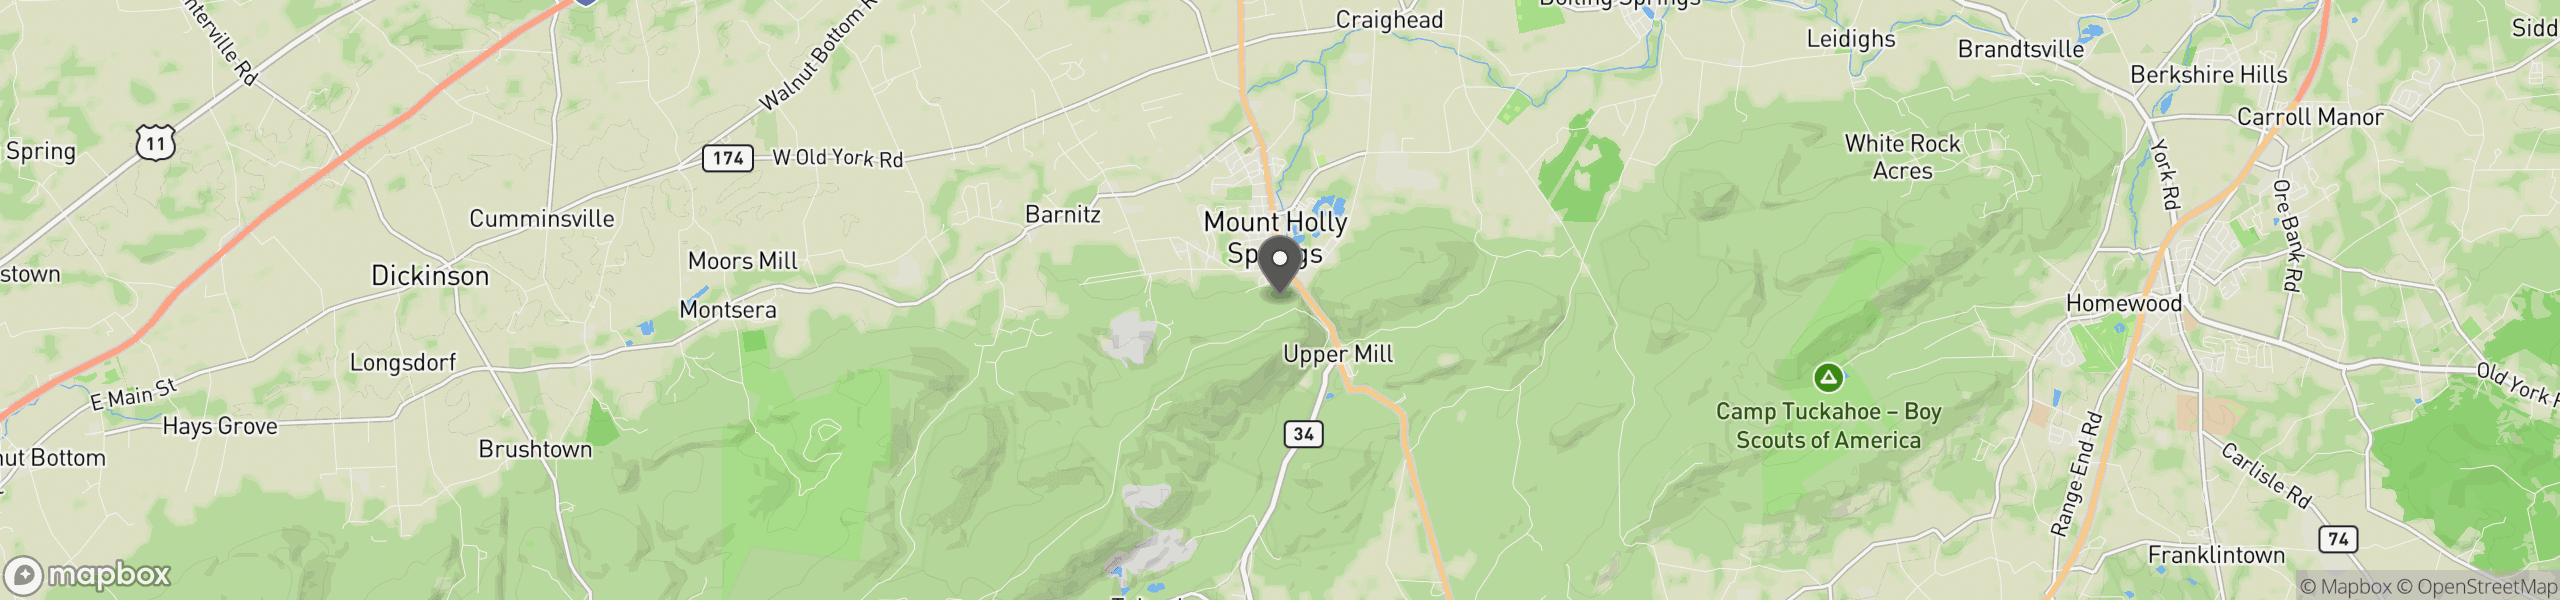 Mount Holly Springs, PA